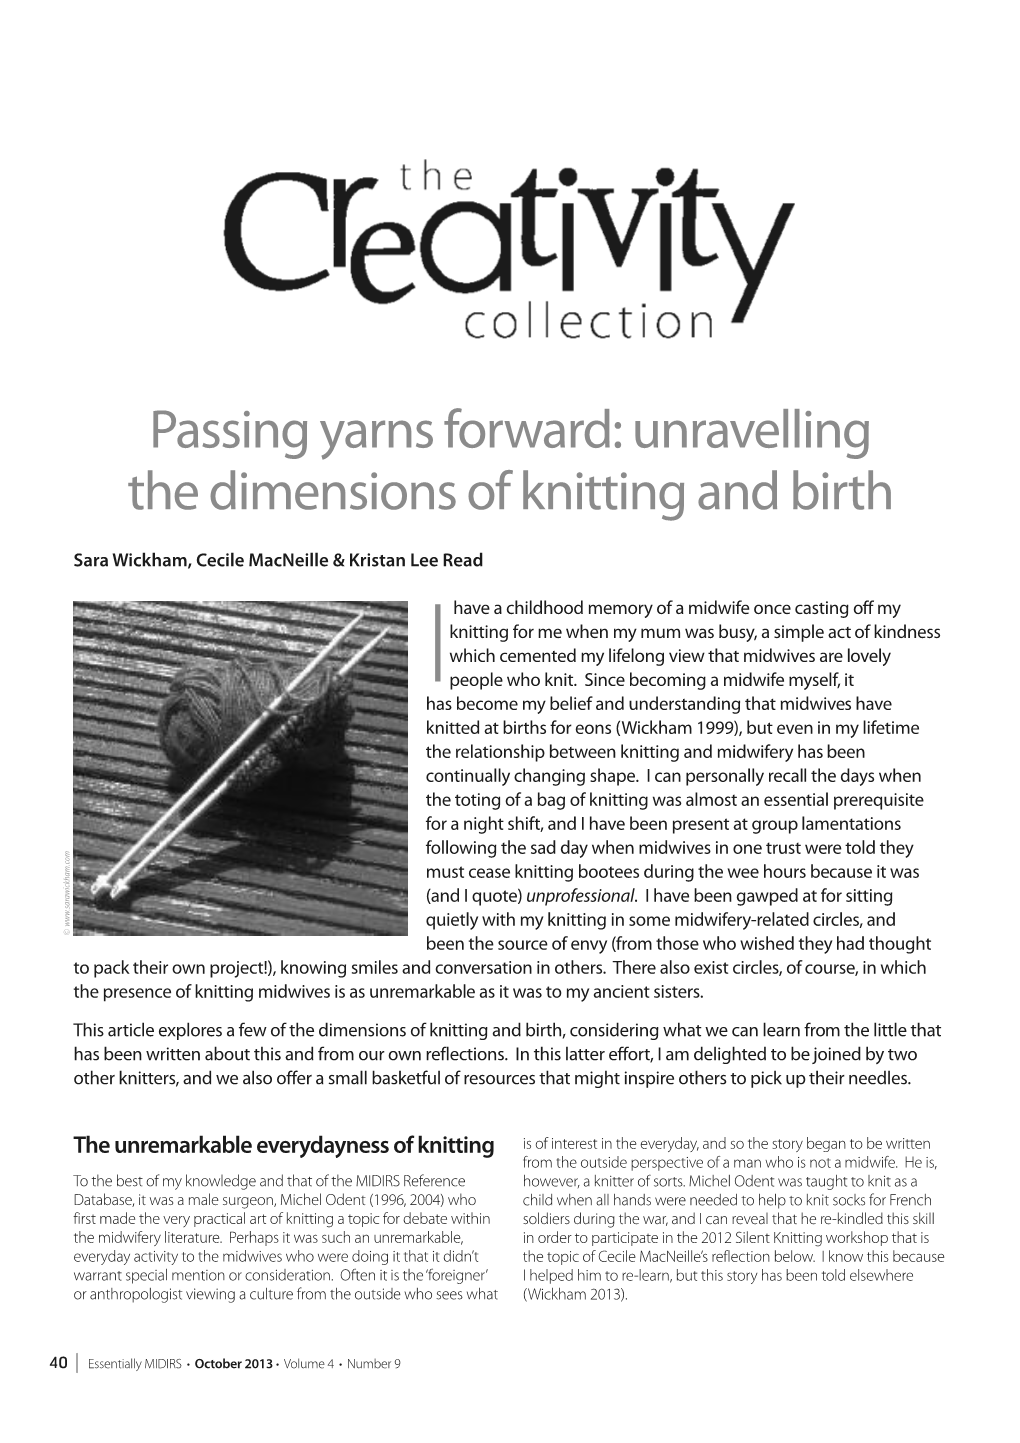 Passing Yarns Forward: Unravelling the Dimensions of Knitting and Birth